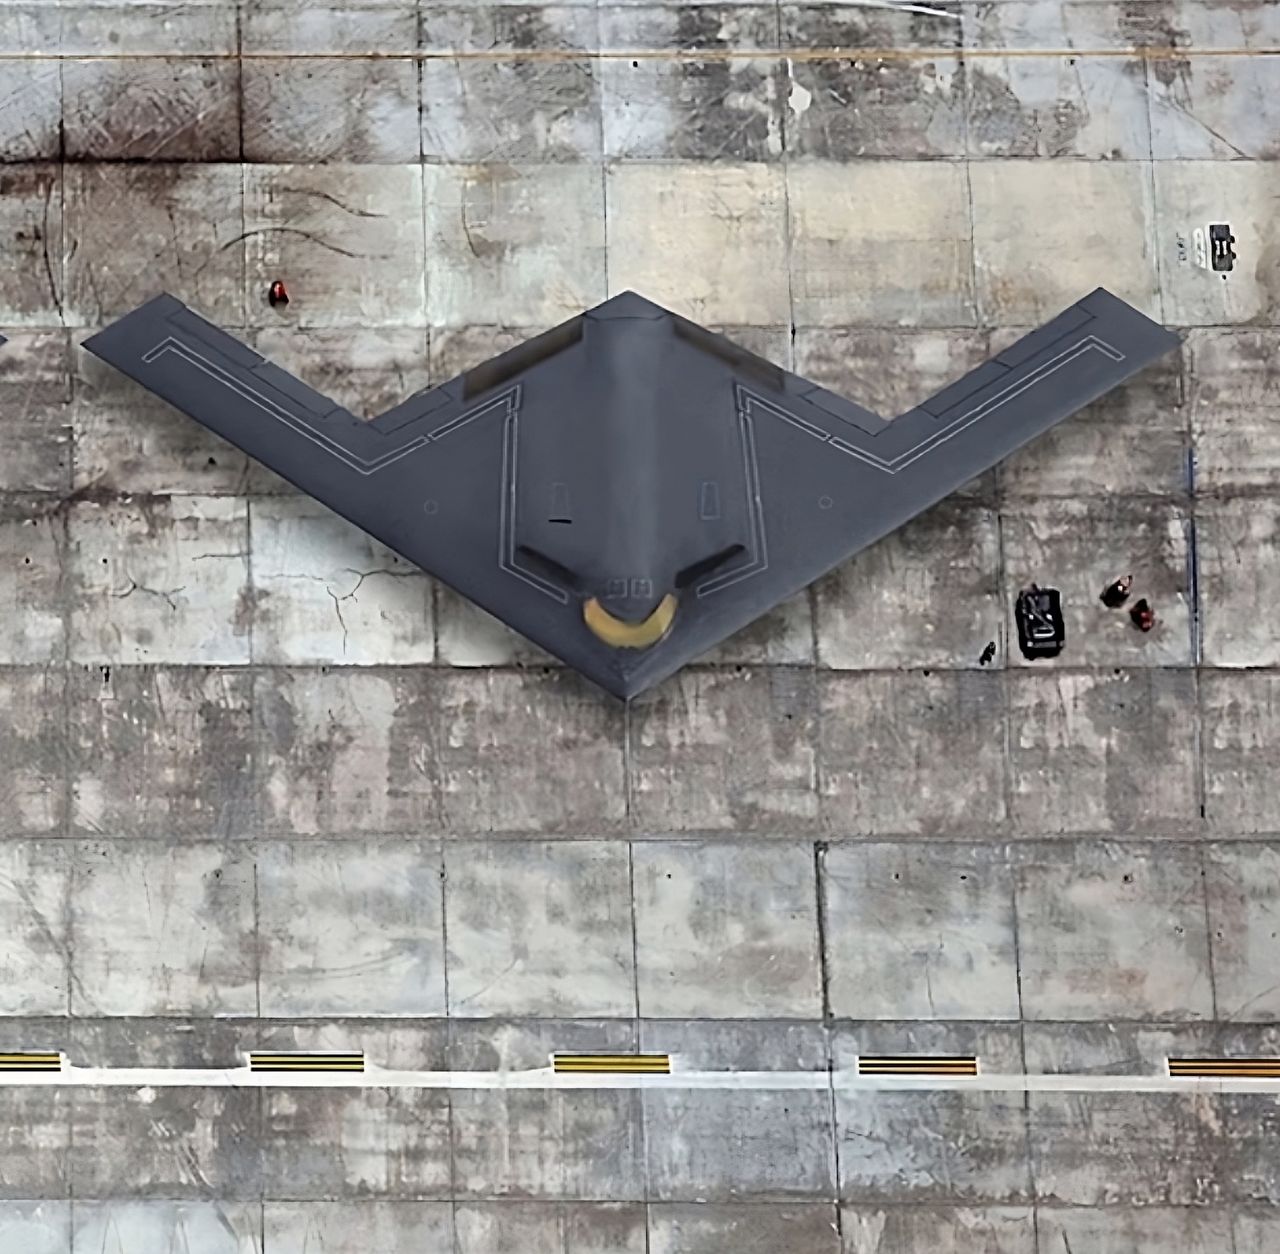 US gets ahead in bomber race: Groundbreaking B-21 stealth bomber with Russian-inspired tech goes into production